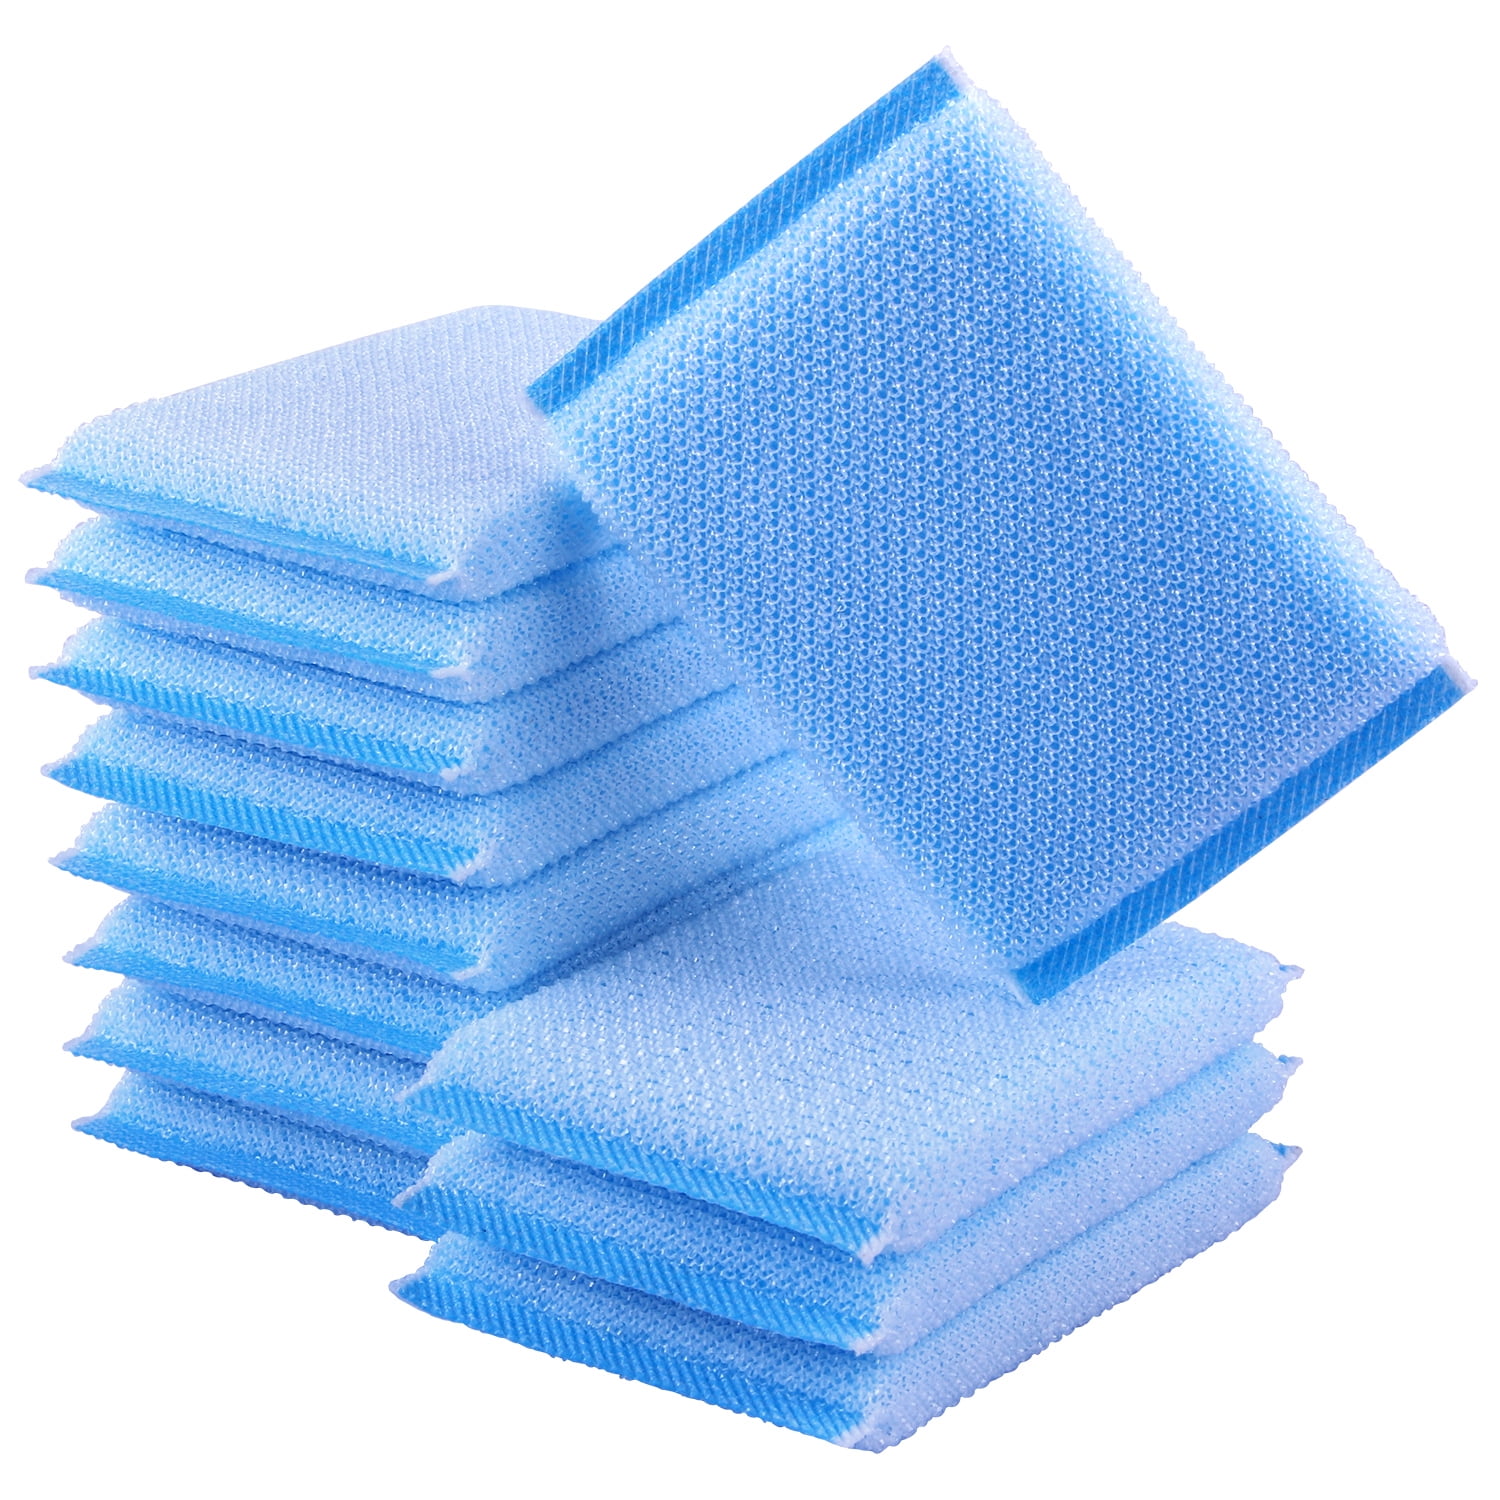 Nylon Cleaning Scrub Pad 12 Pack,Long-Lasting and Reusable